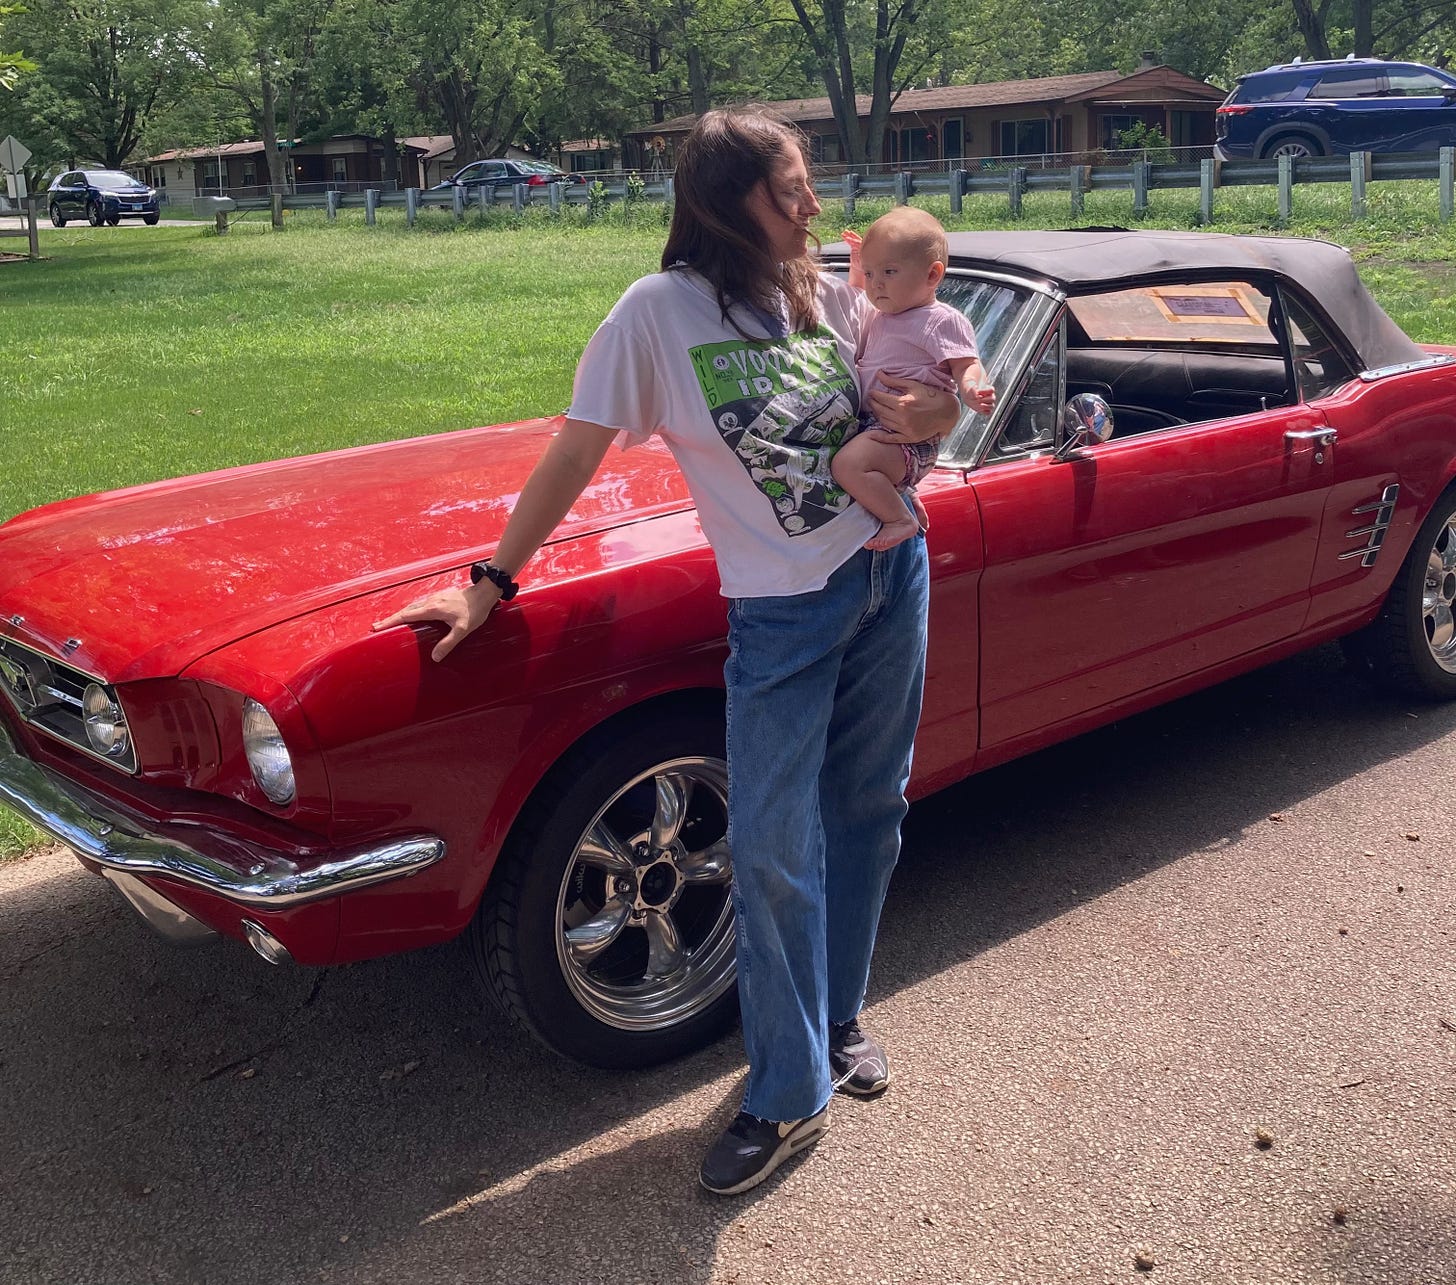 Me and baby standing in front of a 1966 red Mustang